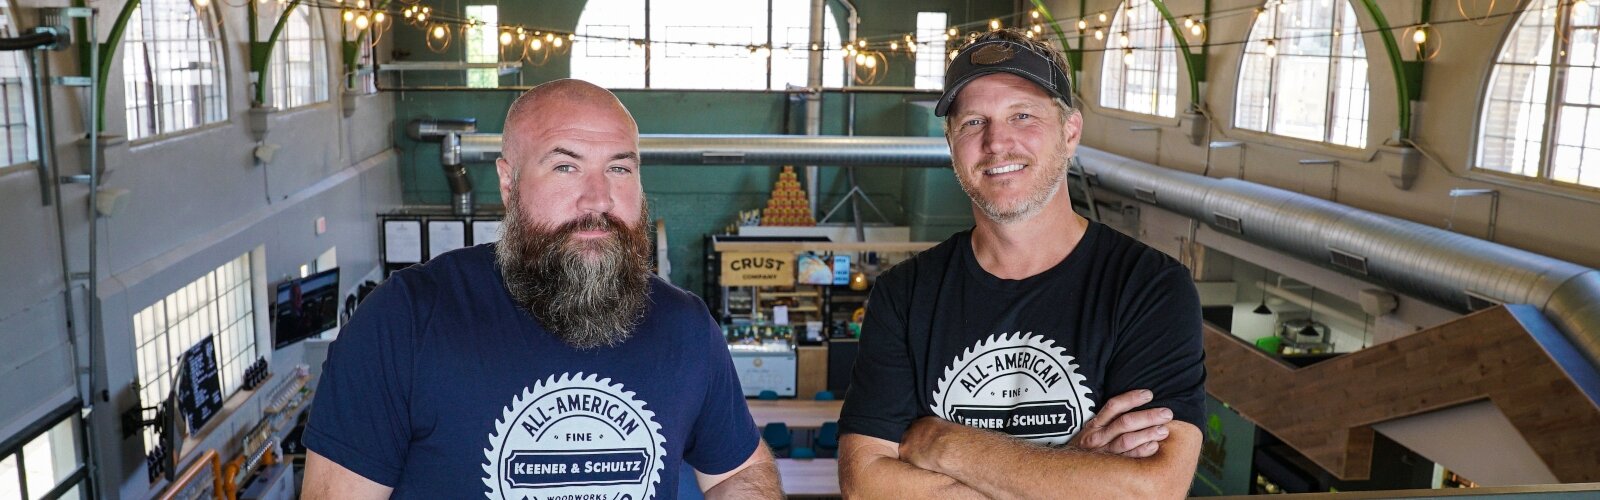 Mark Schultz and Gary Keener own and operate Keener & Schultz Fine Woodworks, through which they build and sell handmade, custom pieces locally and nationwide.